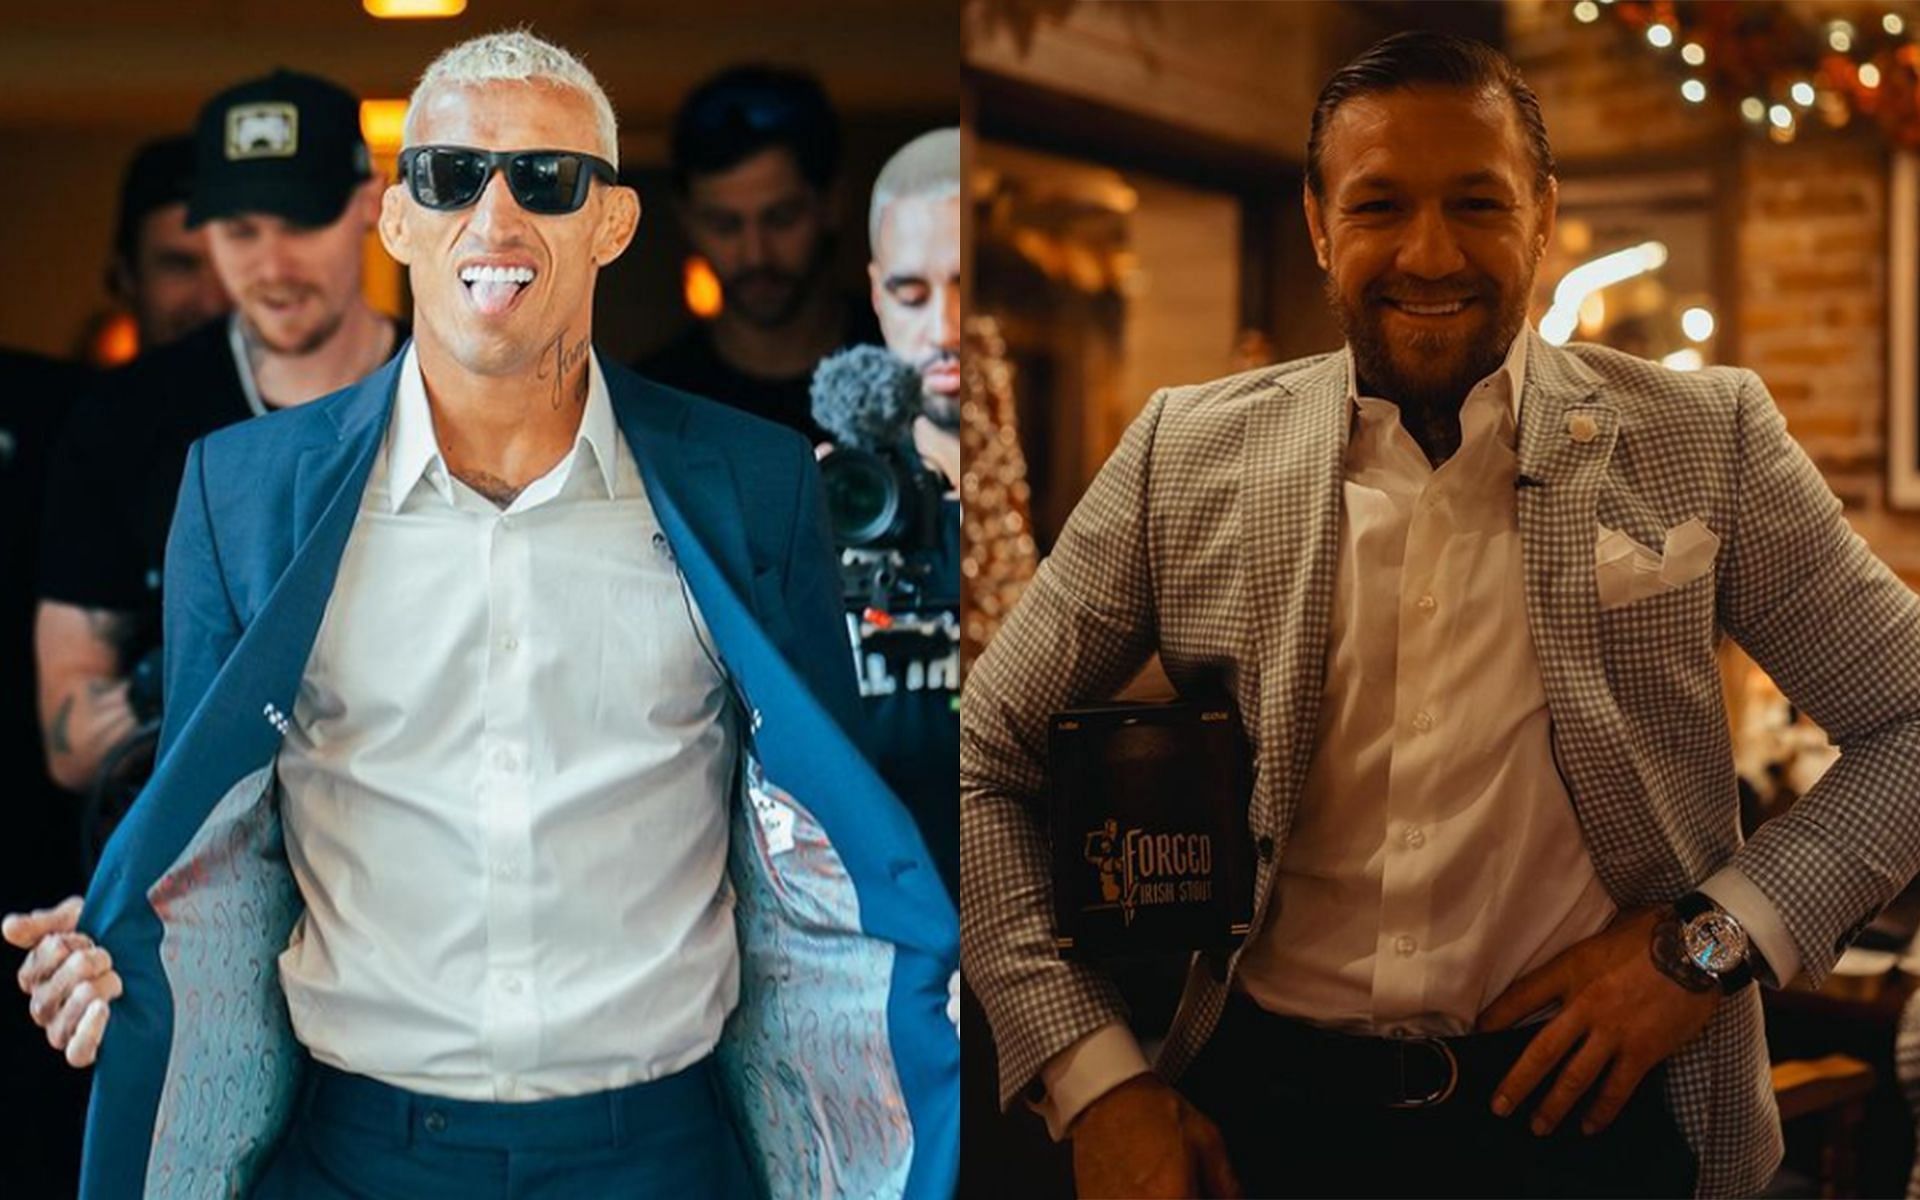 Charles Oliveira (left) vs. Conor McGregor (right) is an average MMA fan